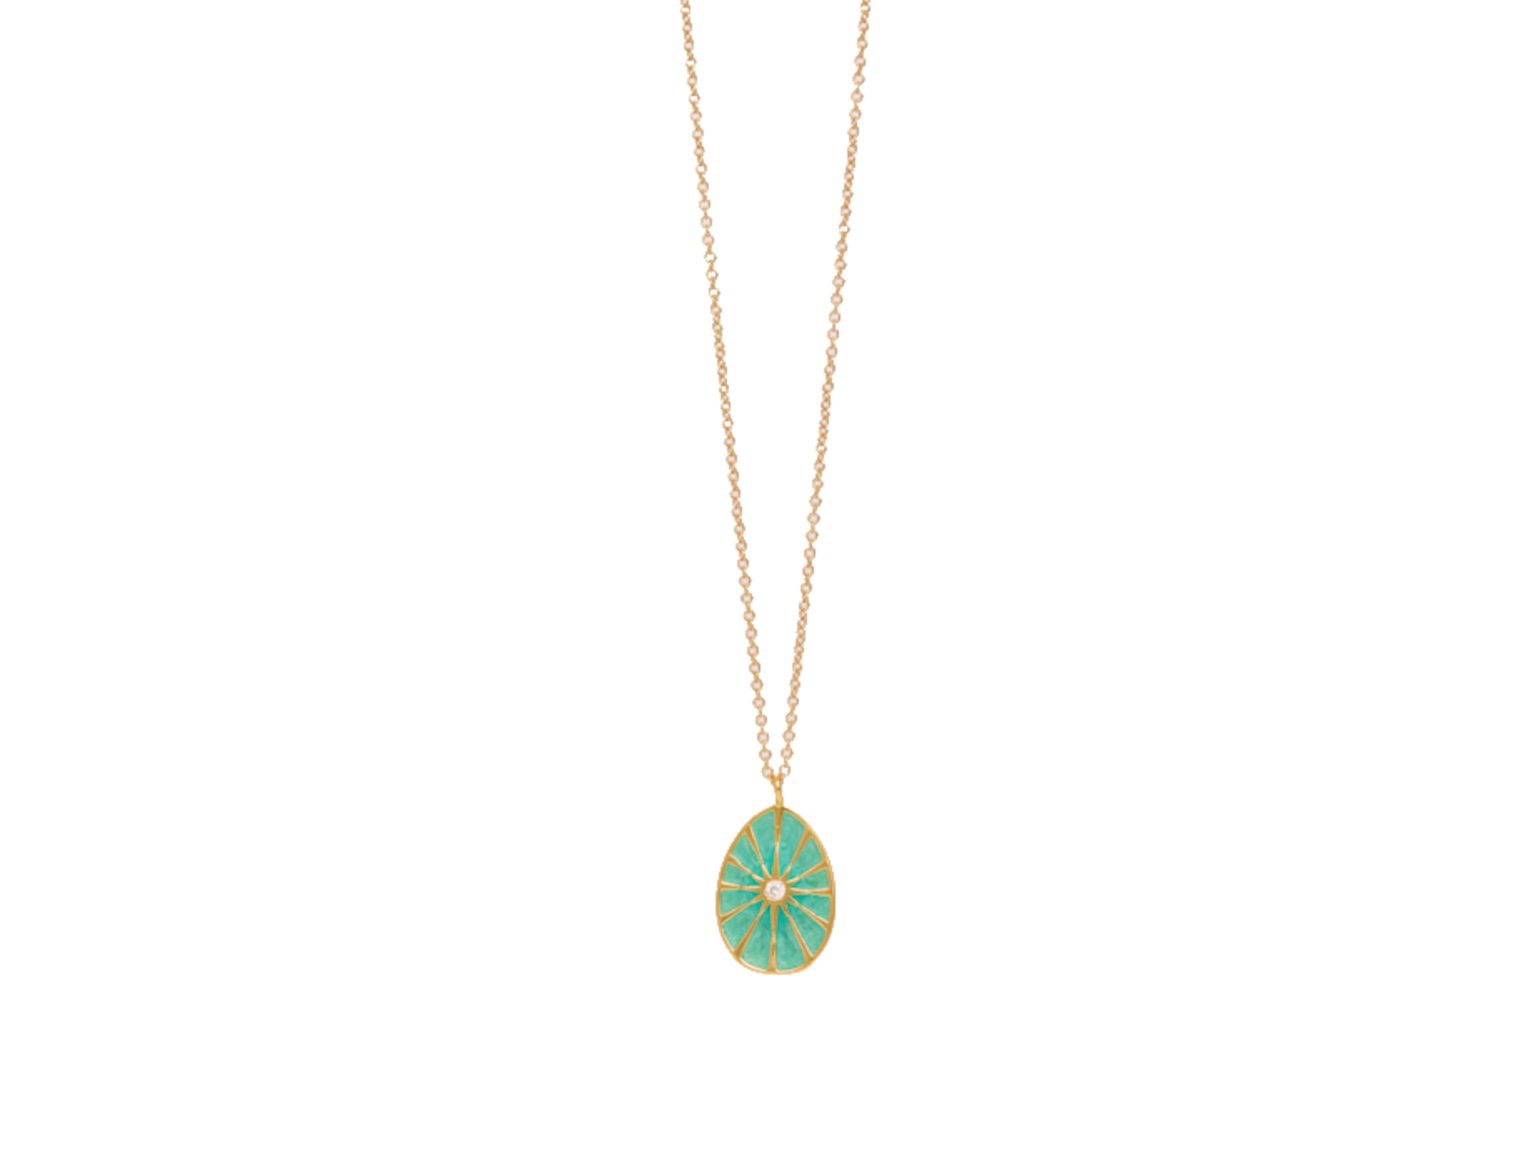 Gold plated egg pendant with turquoise enamel